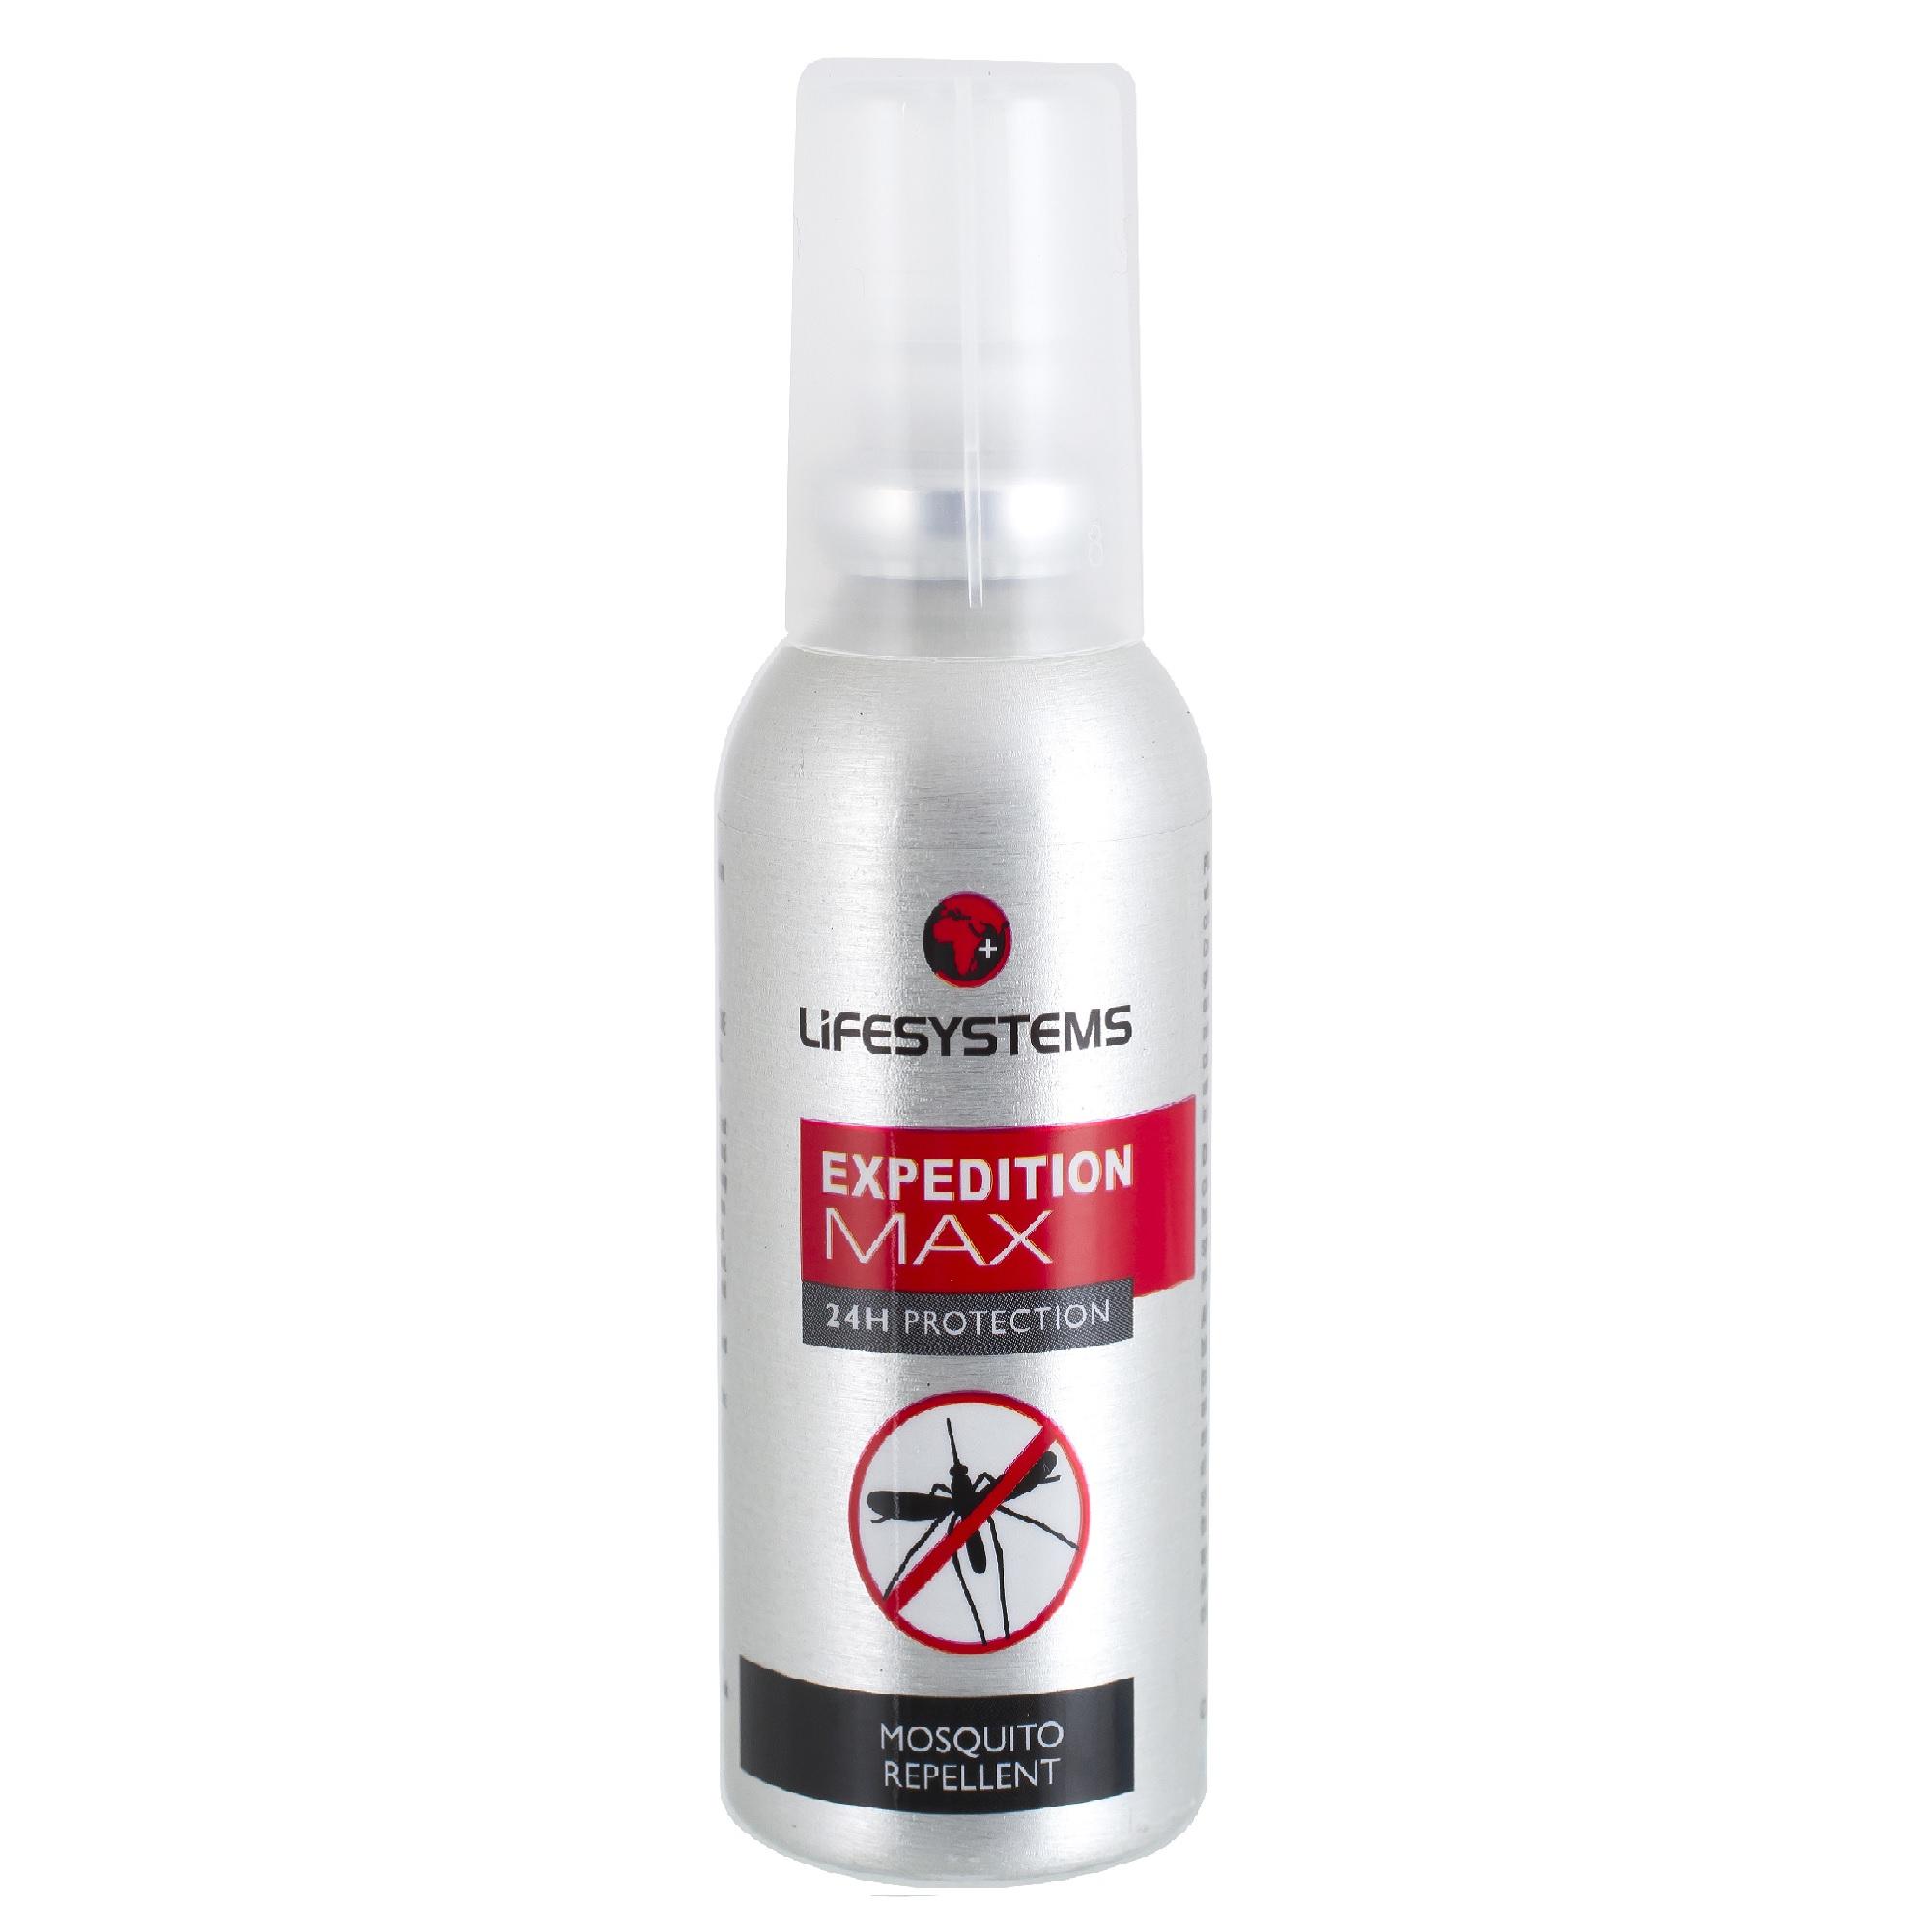 LIFESYSTEMS Expedition MAX INSECT REPELLENT - 50ml